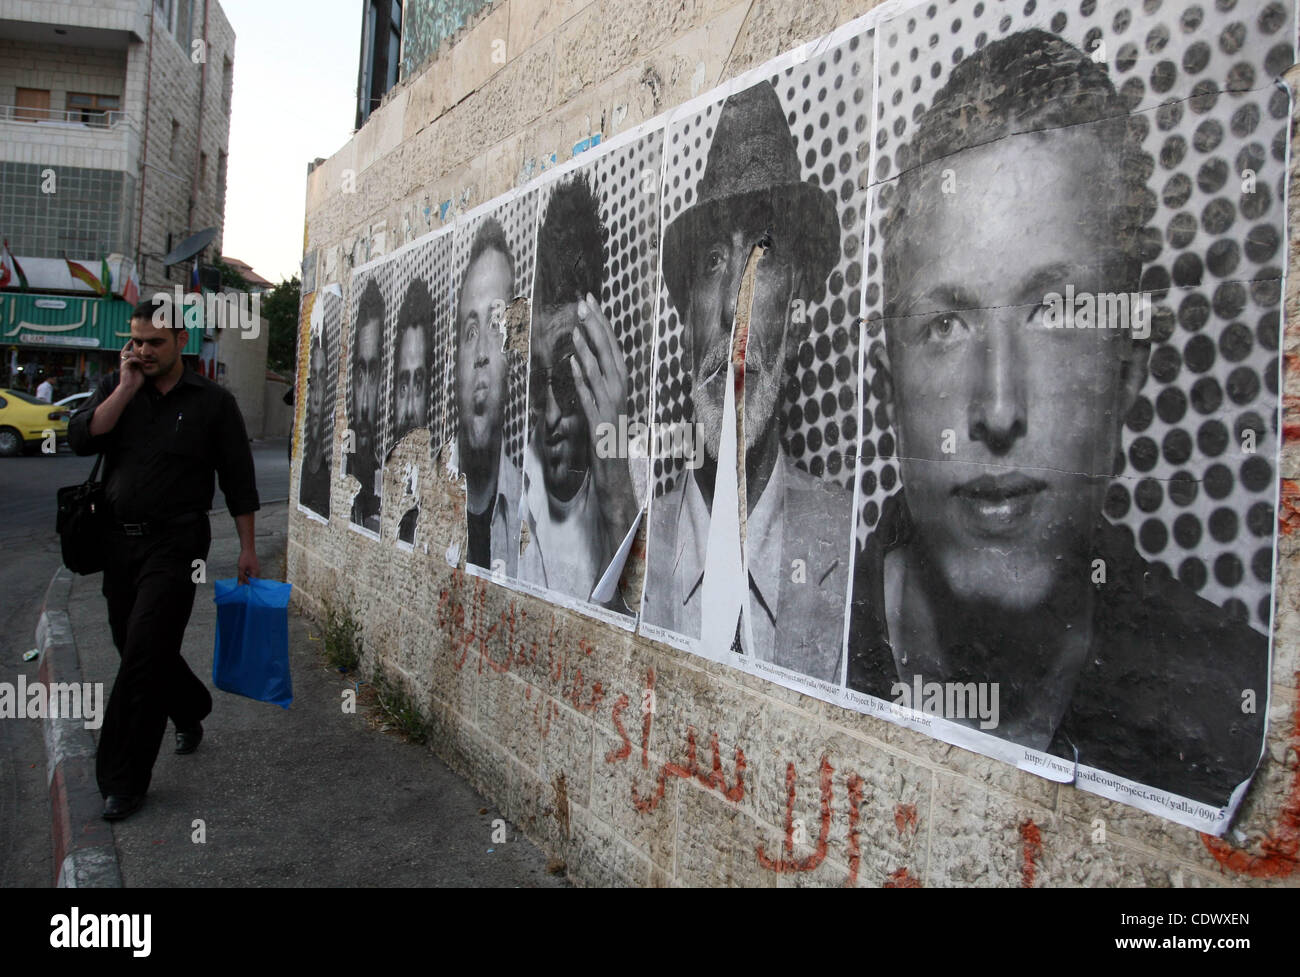 A Palestinian man walks past large black and white photographs taken by French street artist JR of Palestinians, on September 6, 2011, in the West Bank city of Ramallah. JR's project entails having Palestinian and Israeli portraits taken which are then printed and pasted onto walls In Israel and the Stock Photo